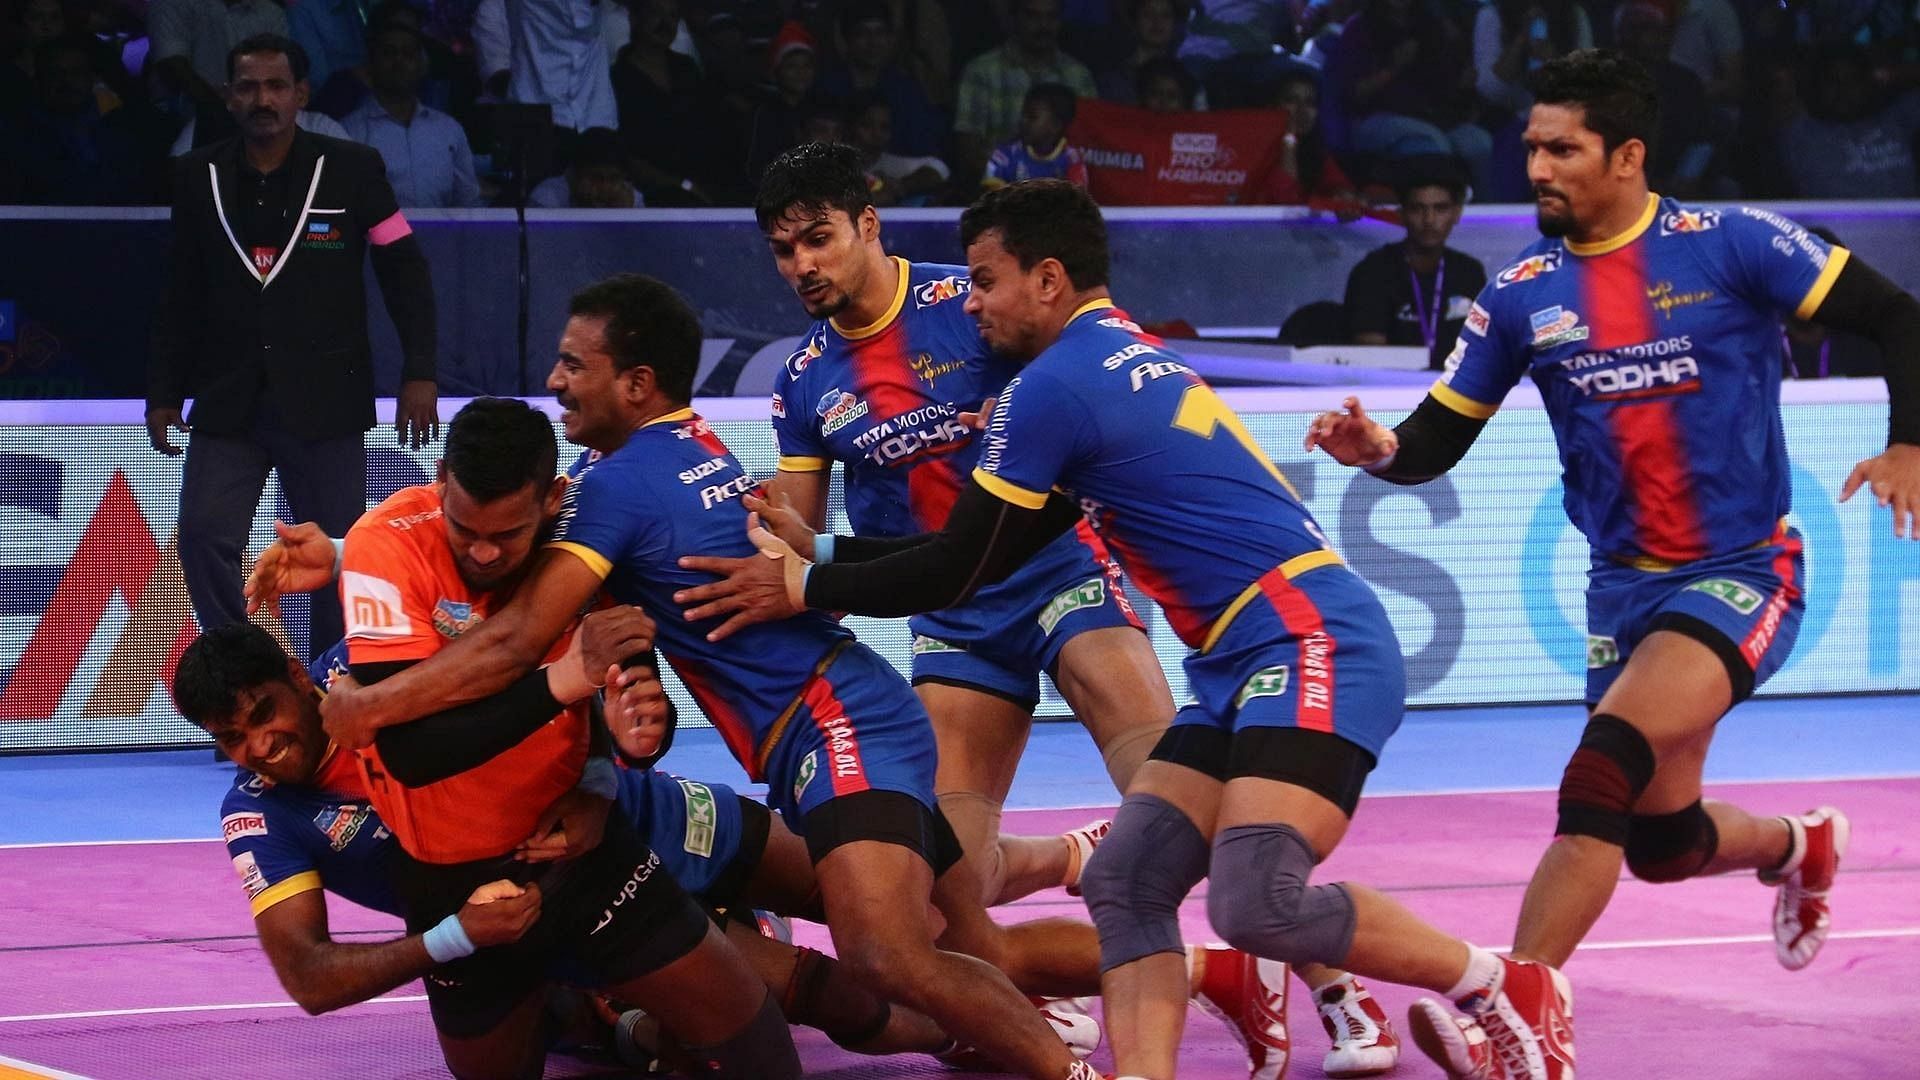 UP Yoddha have been a consistently-performing team in the Pro Kabaddi League since joining (Image - PKL)